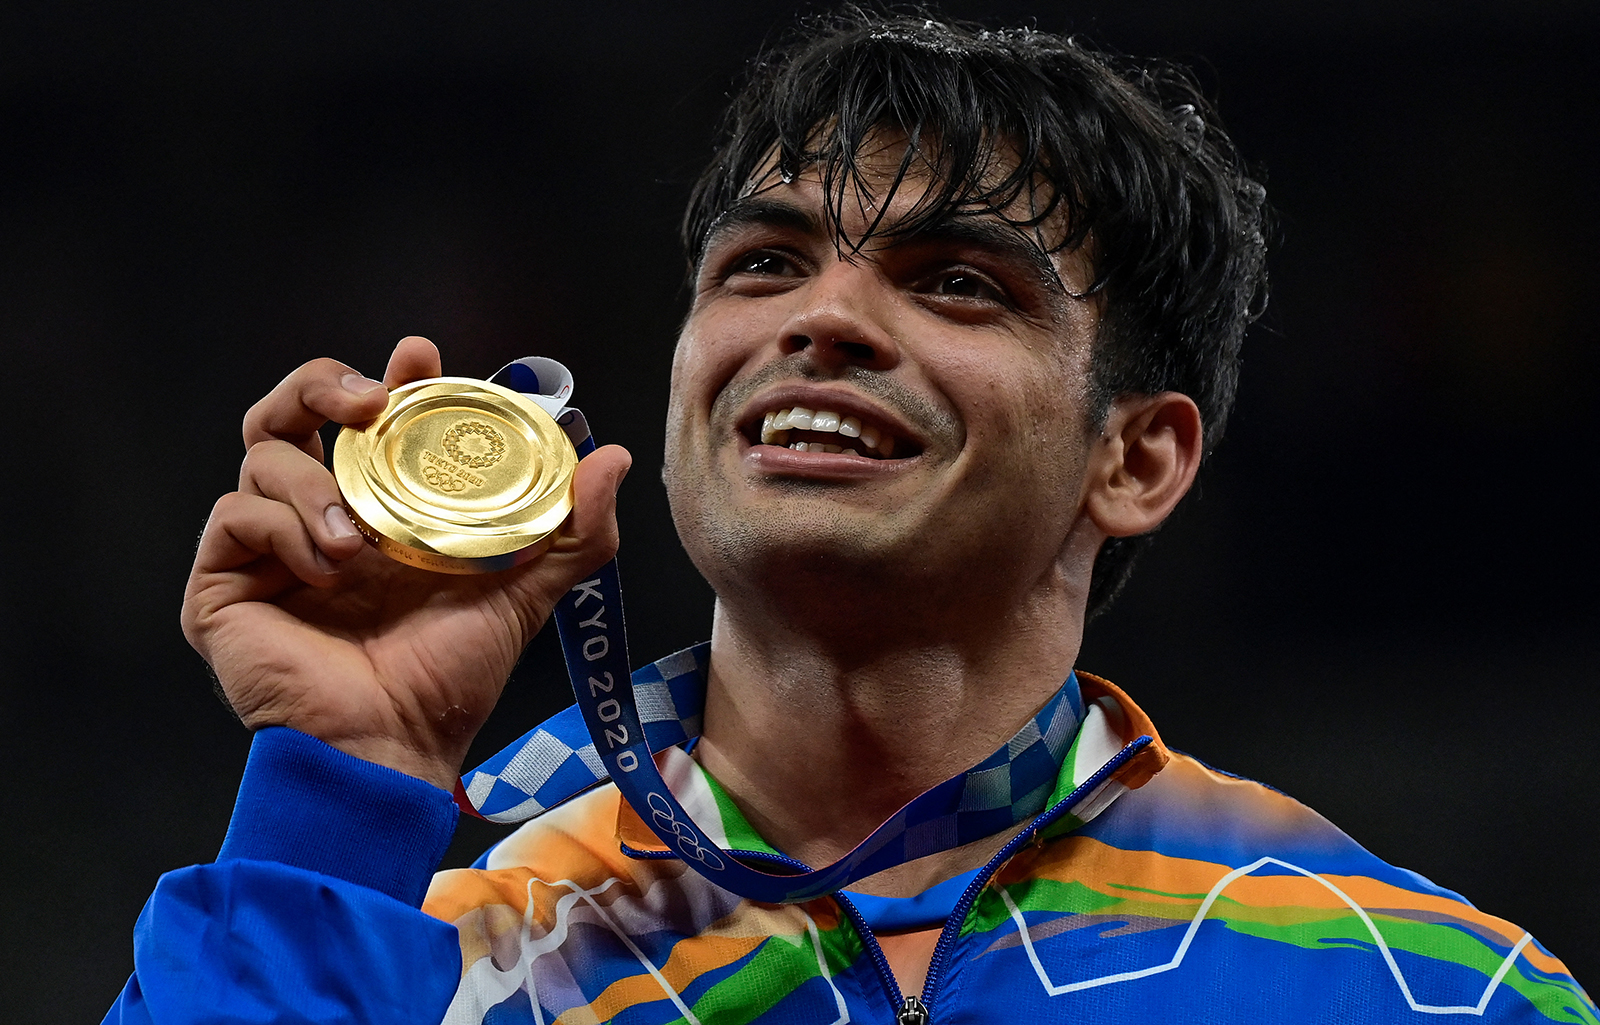 India's Neeraj Chopra celebrates on the podium during the victory ceremony for winning gold in the men's javelin throw event during the Tokyo 2020 Olympic Games at the Olympic Stadium in Tokyo on August 7.